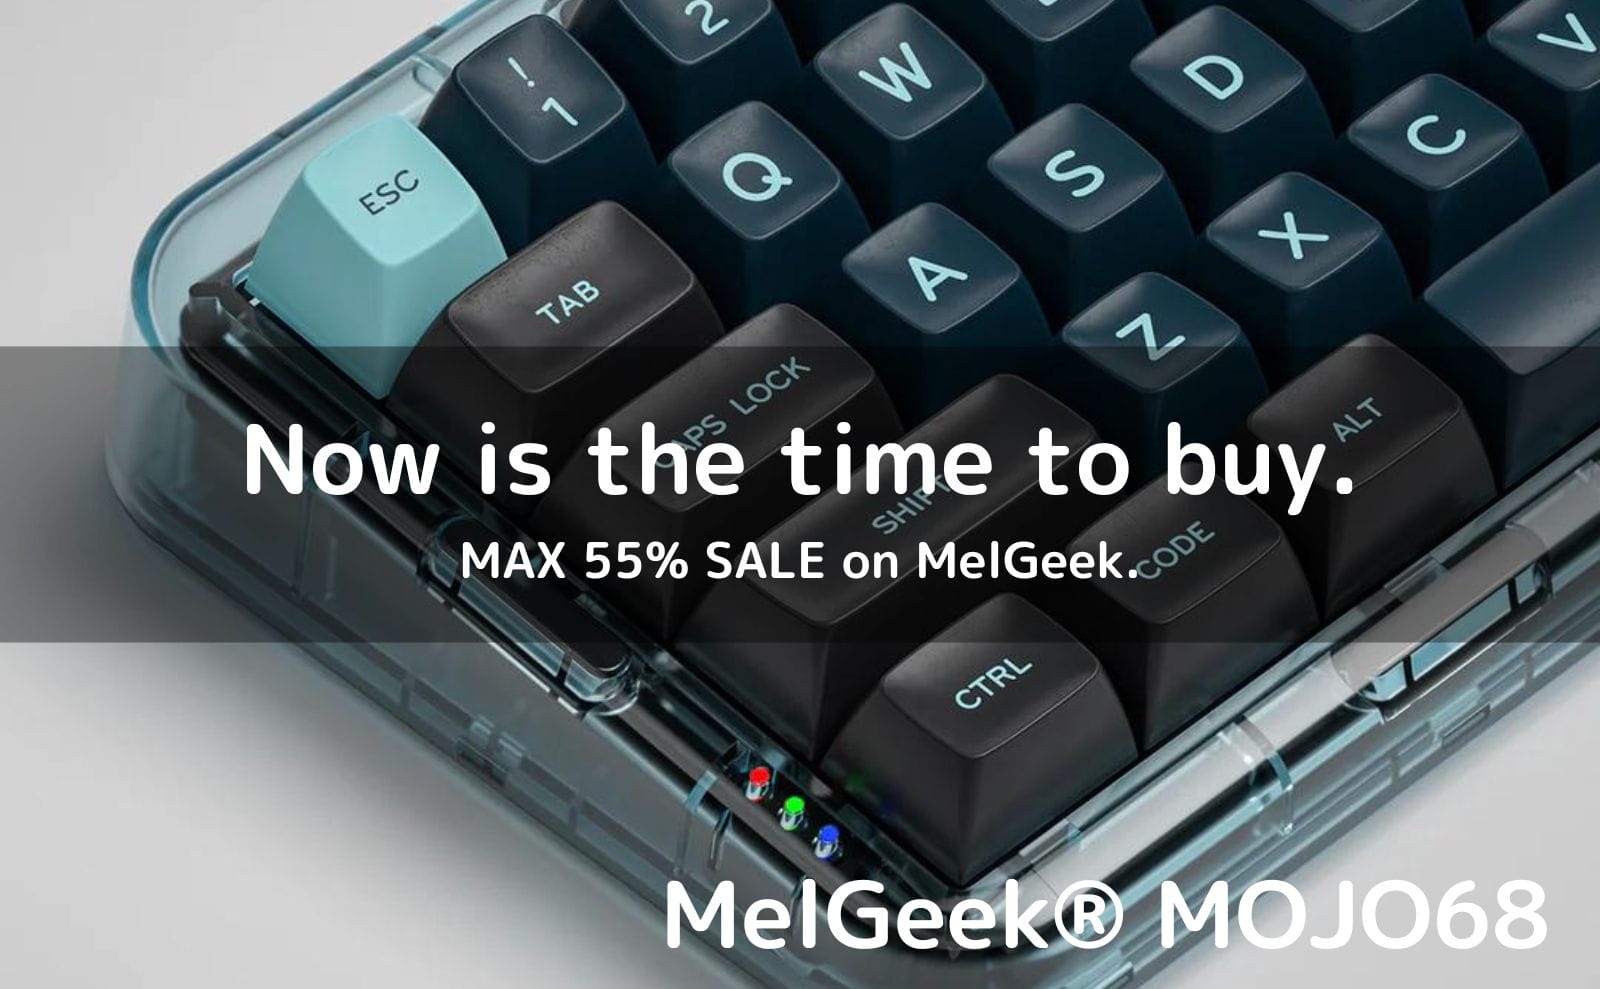 MelGeek MOJO68, MOJO84 and more on sale at the official online